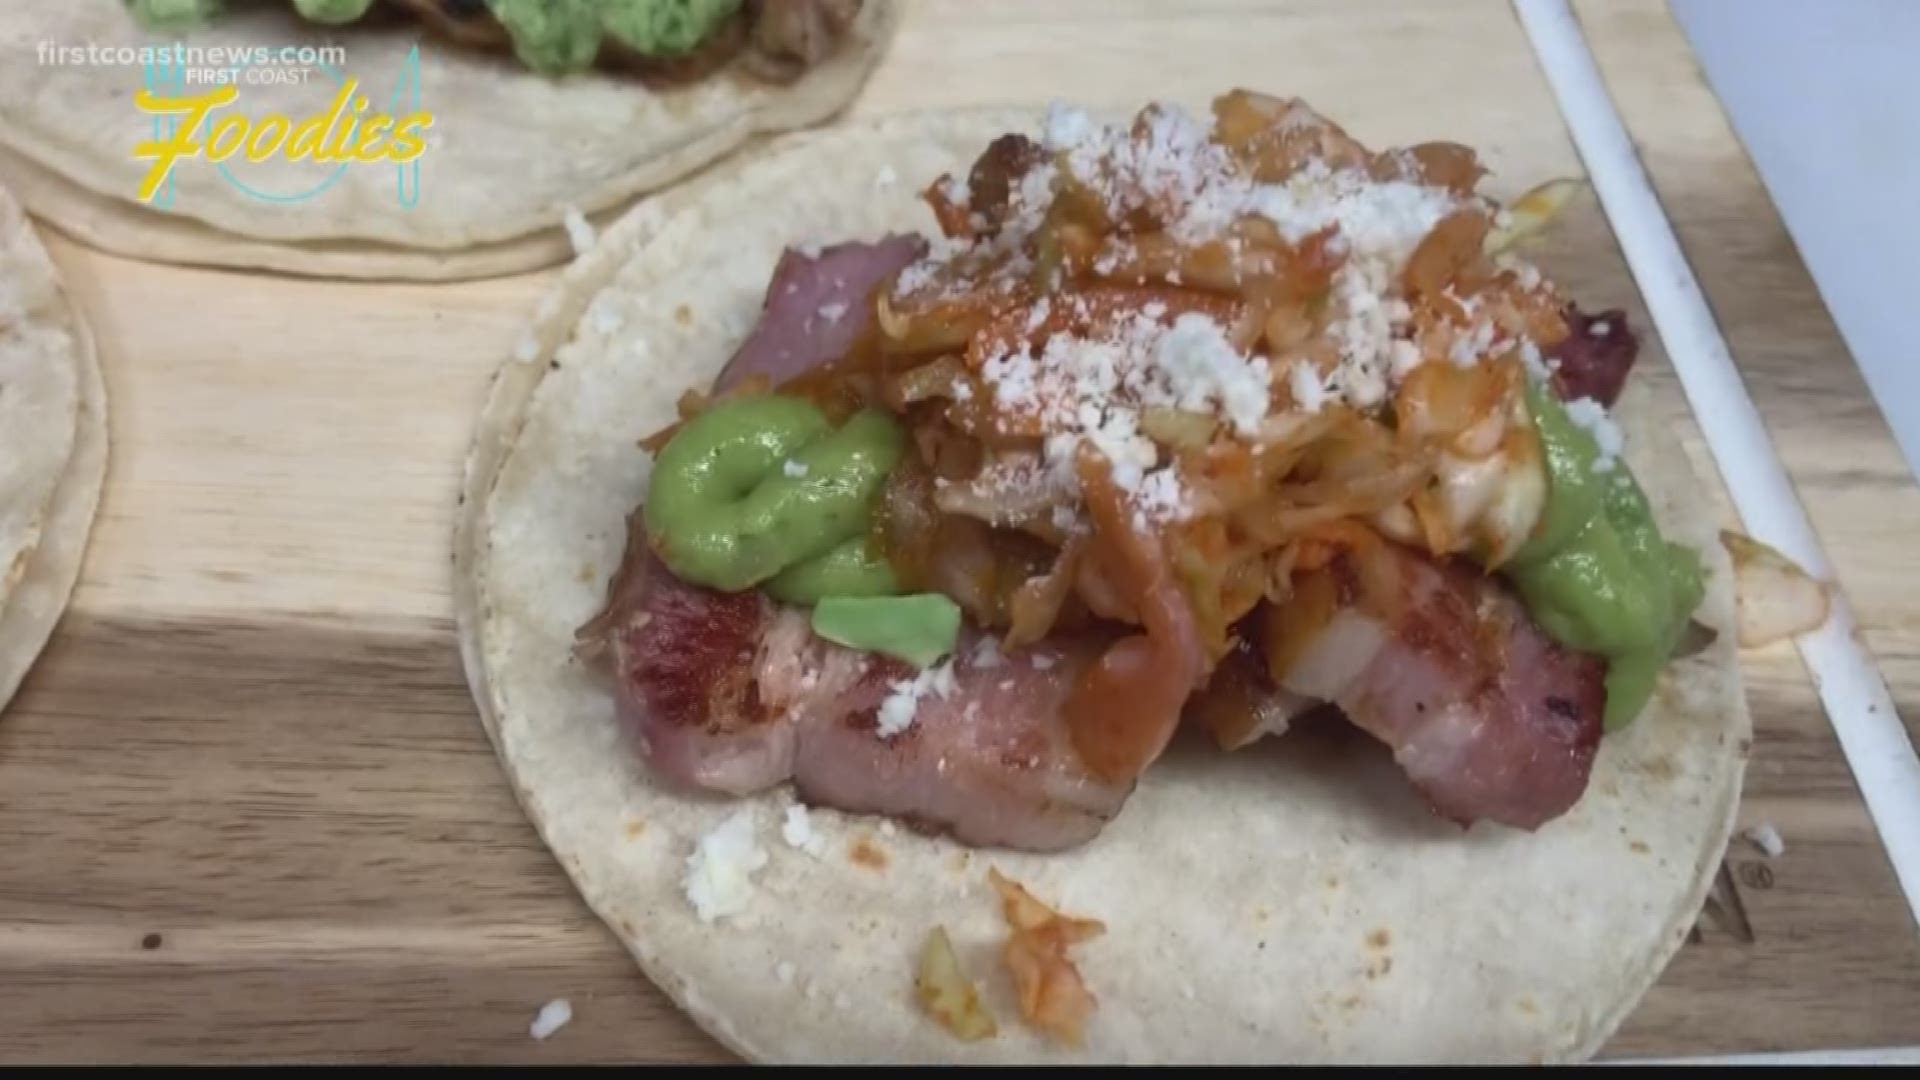 This food truck brings the heat with delicious tacos, burritos and much more.